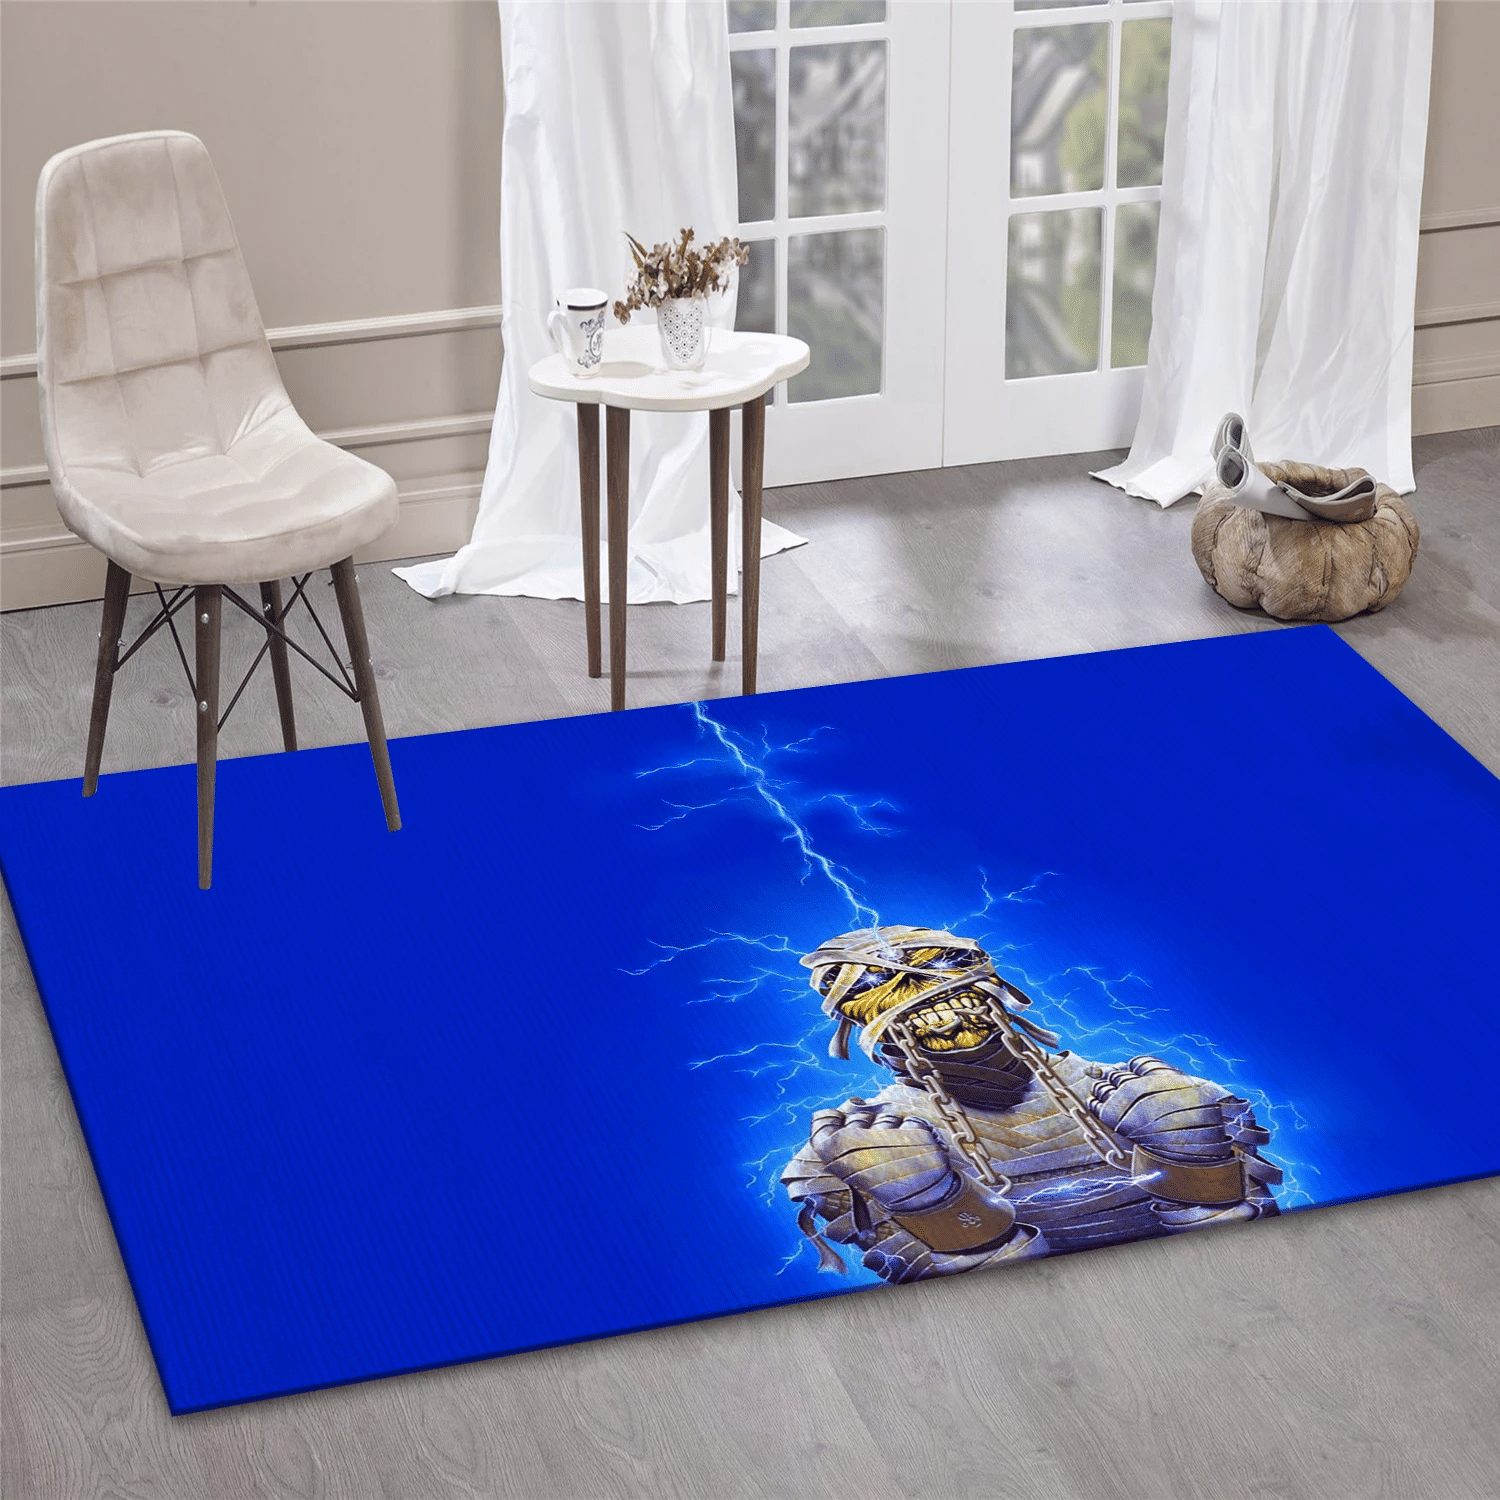 Iron Maiden Hot Album Music Area Rug For Christmas, Living Room  Rug - Home Decor - Indoor Outdoor Rugs 1